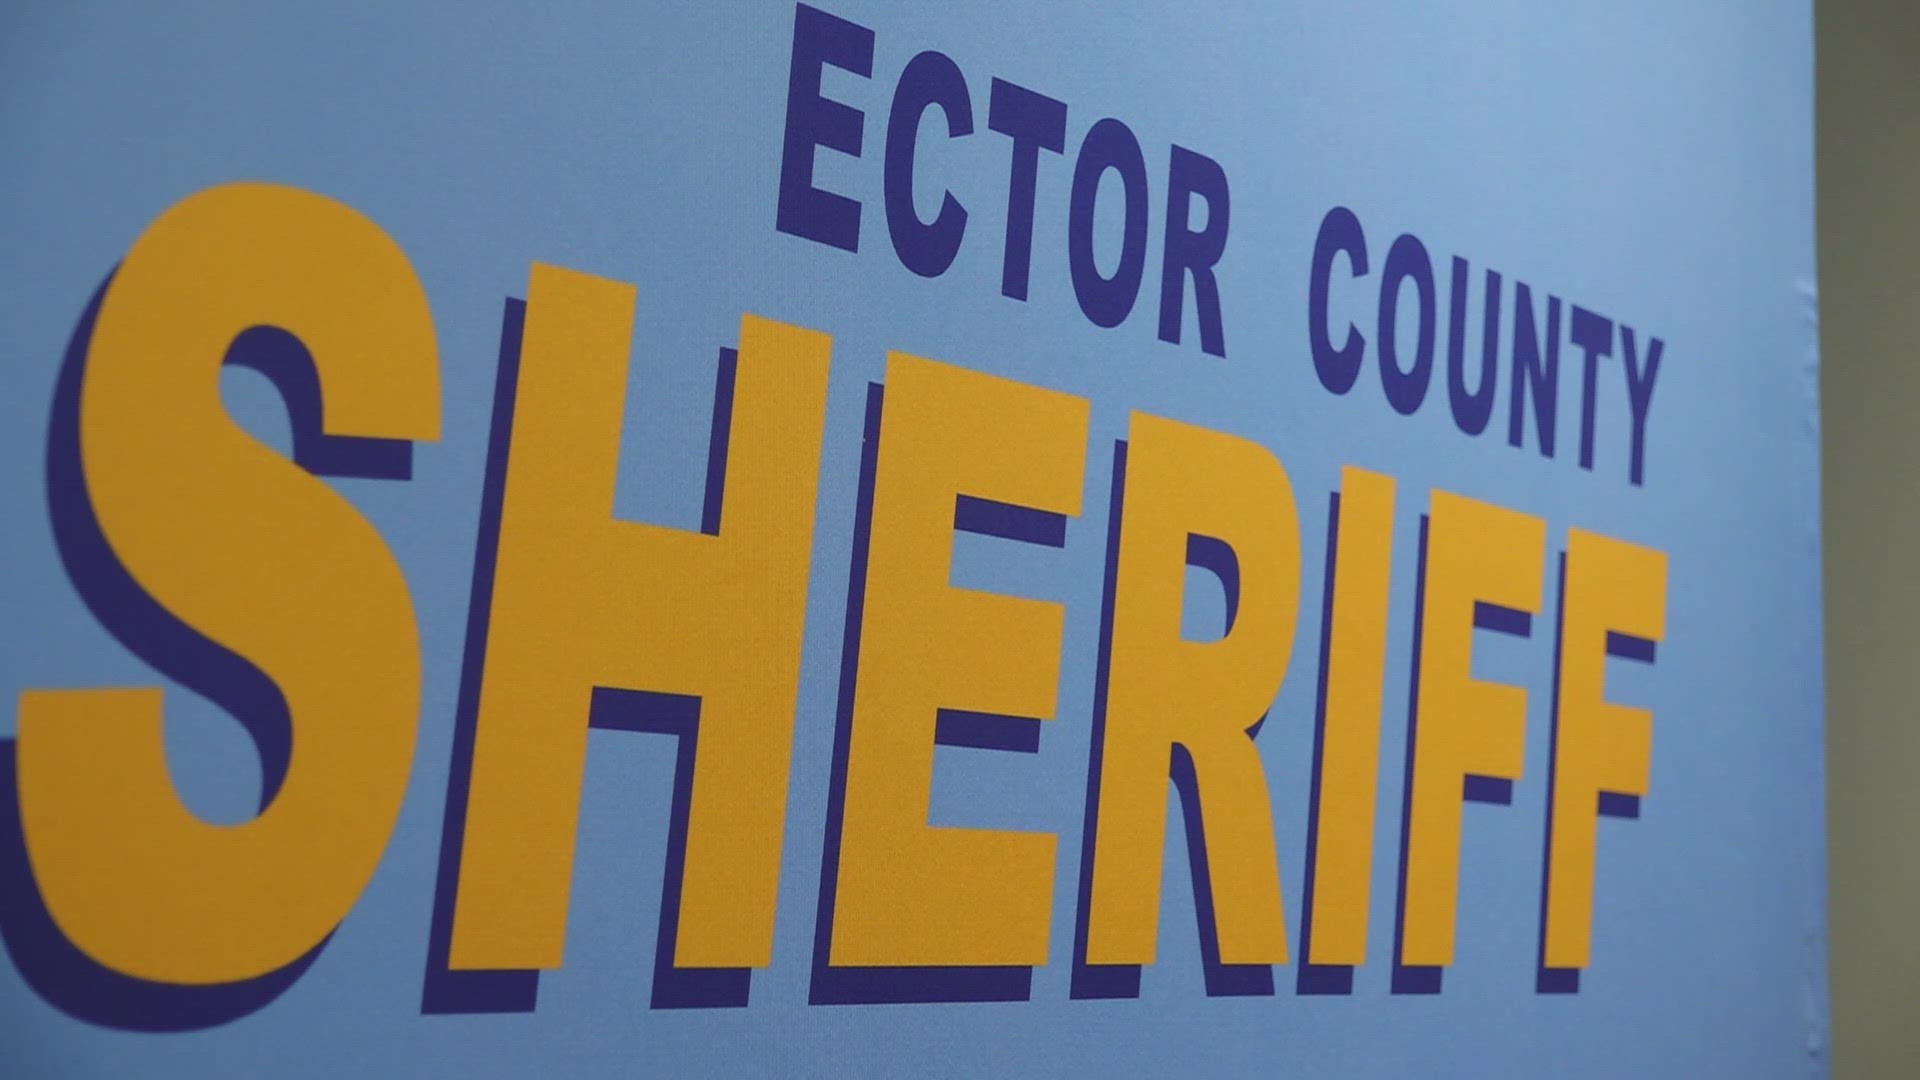 On Saturday, Ector County deputies received a call of a loud party and shots fired at Whirlaway Dr. in West Odessa. Two gunshot victims suffered serious injuries.